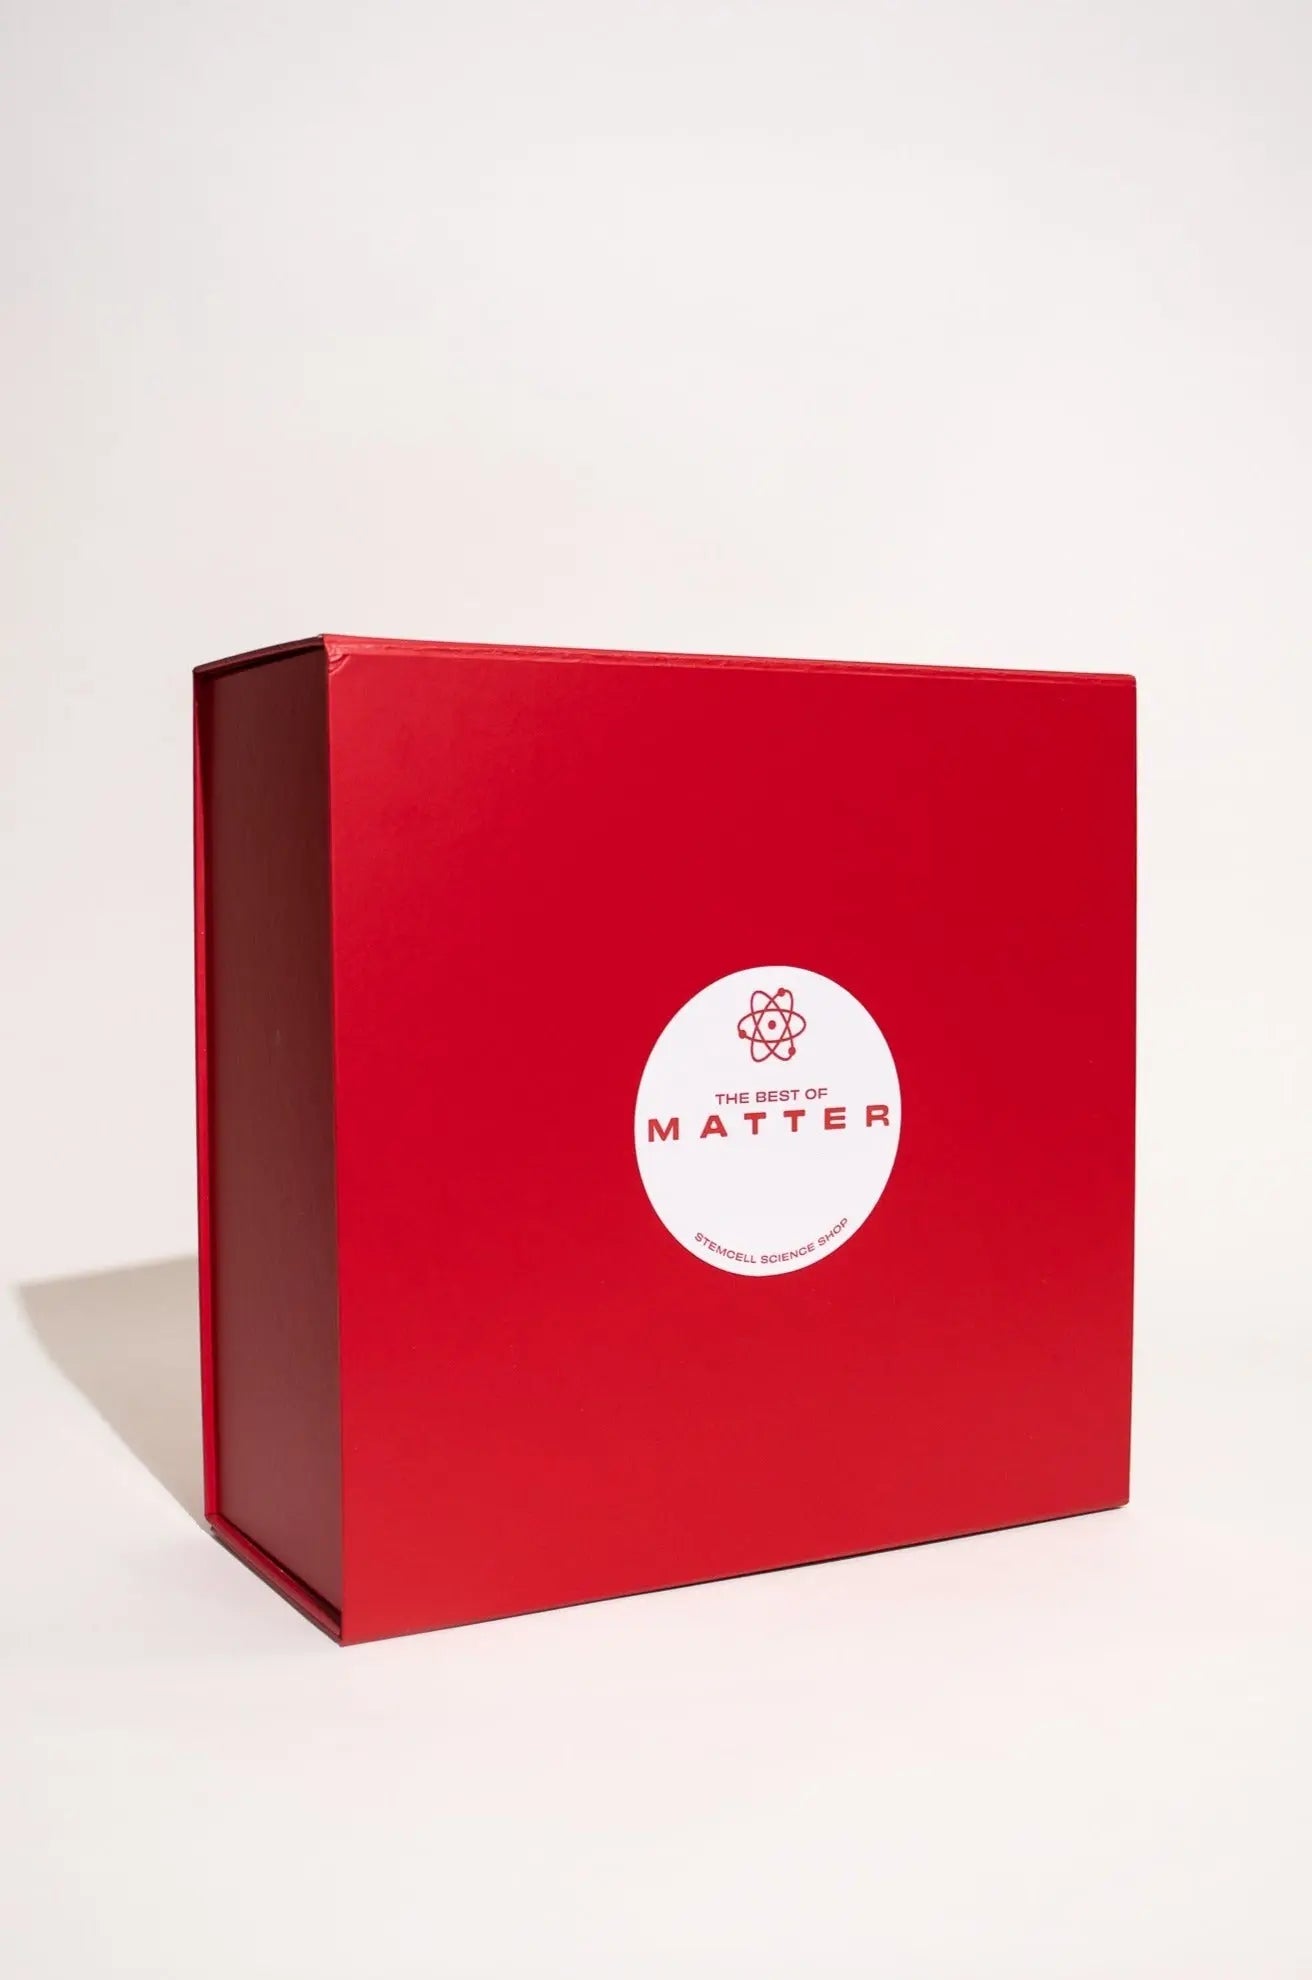 Best of Matter Collection - Stemcell Science Shop